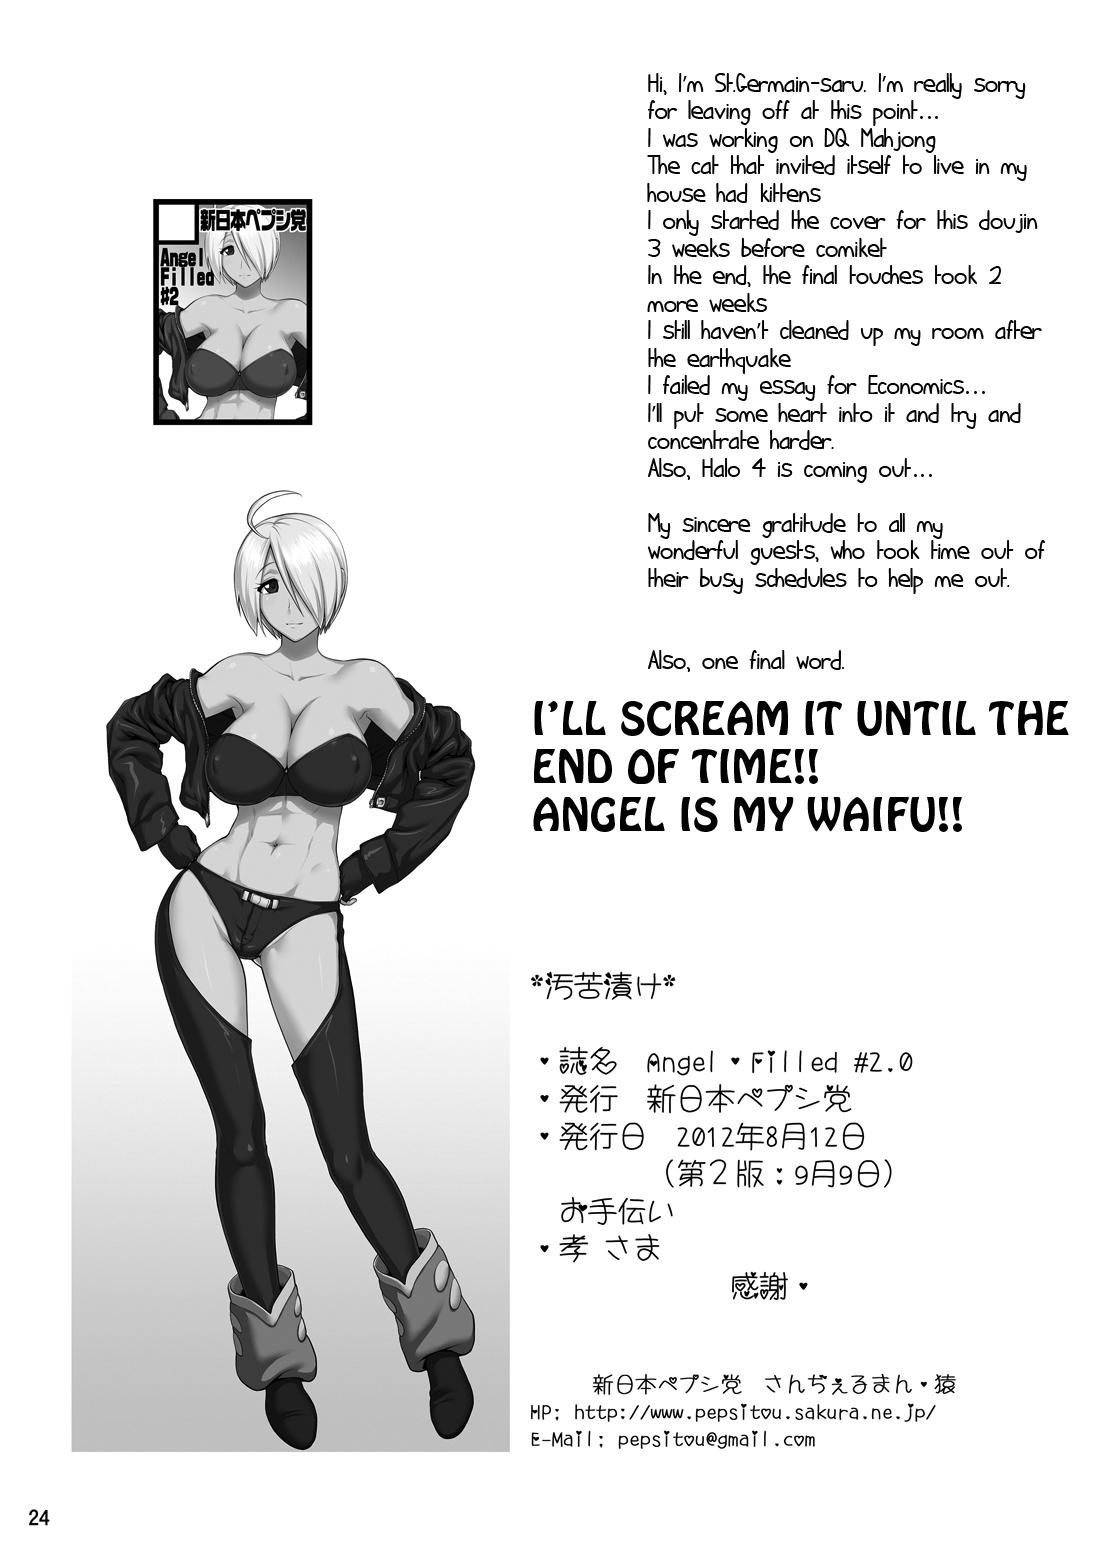 Ex Girlfriend Angel Filled #2.0 - King of fighters Rough Fucking - Page 25